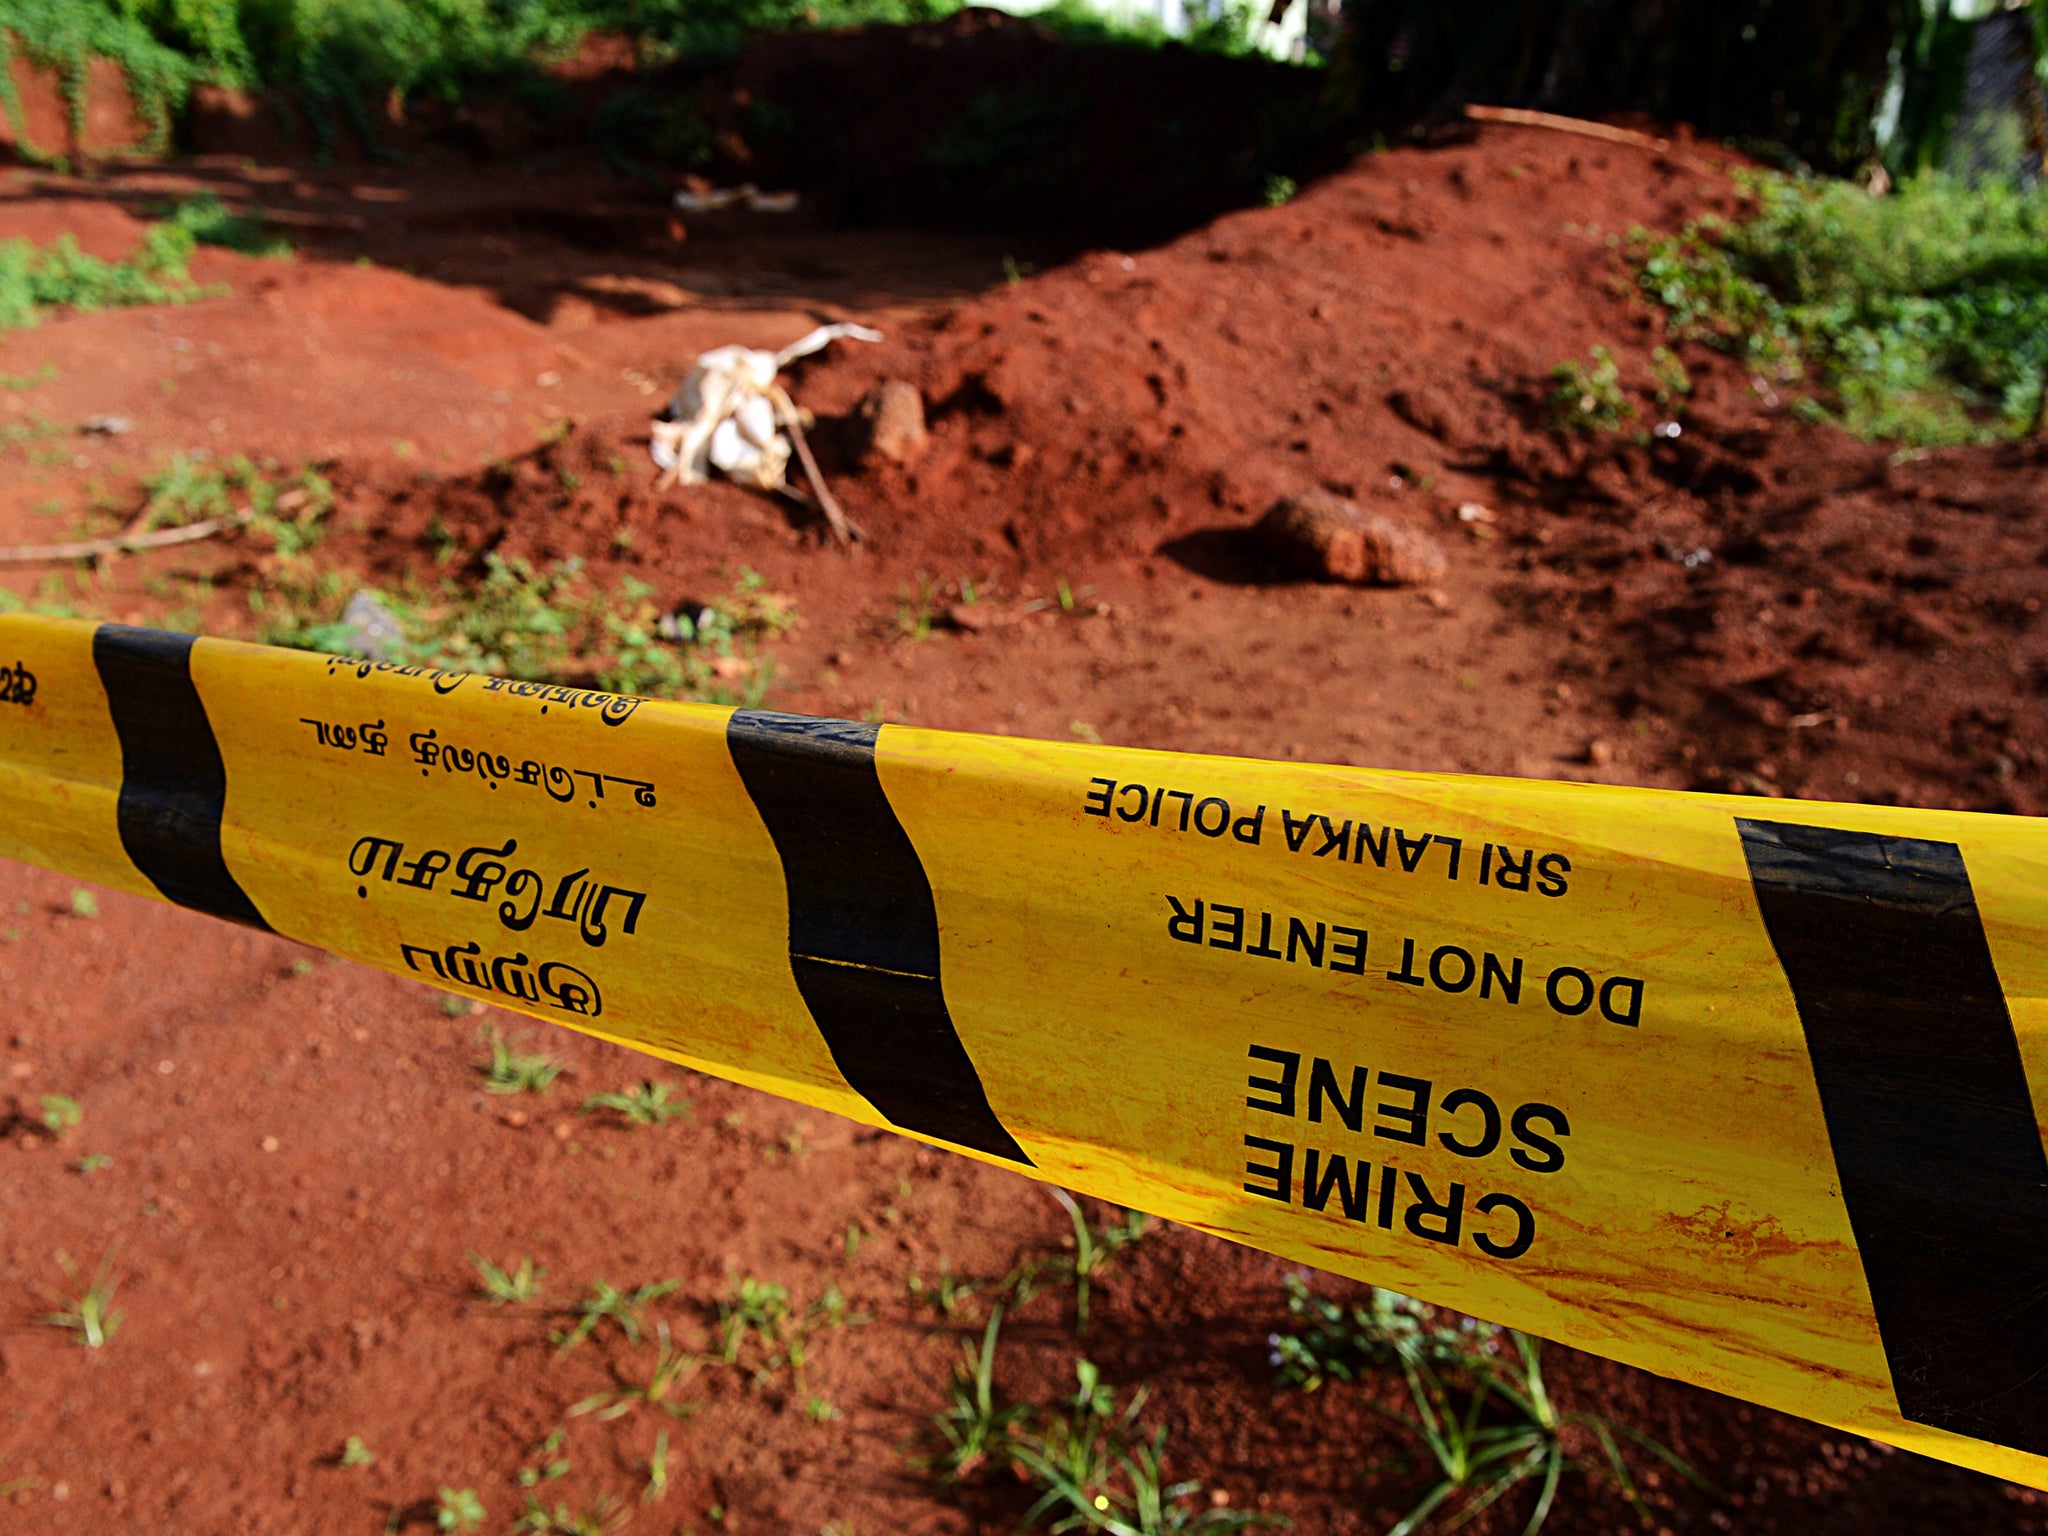 Police tape closes off part of a mass grave where authorities found skeletal remains of over 150 people at the Matale hospital compound in central Sri Lanka